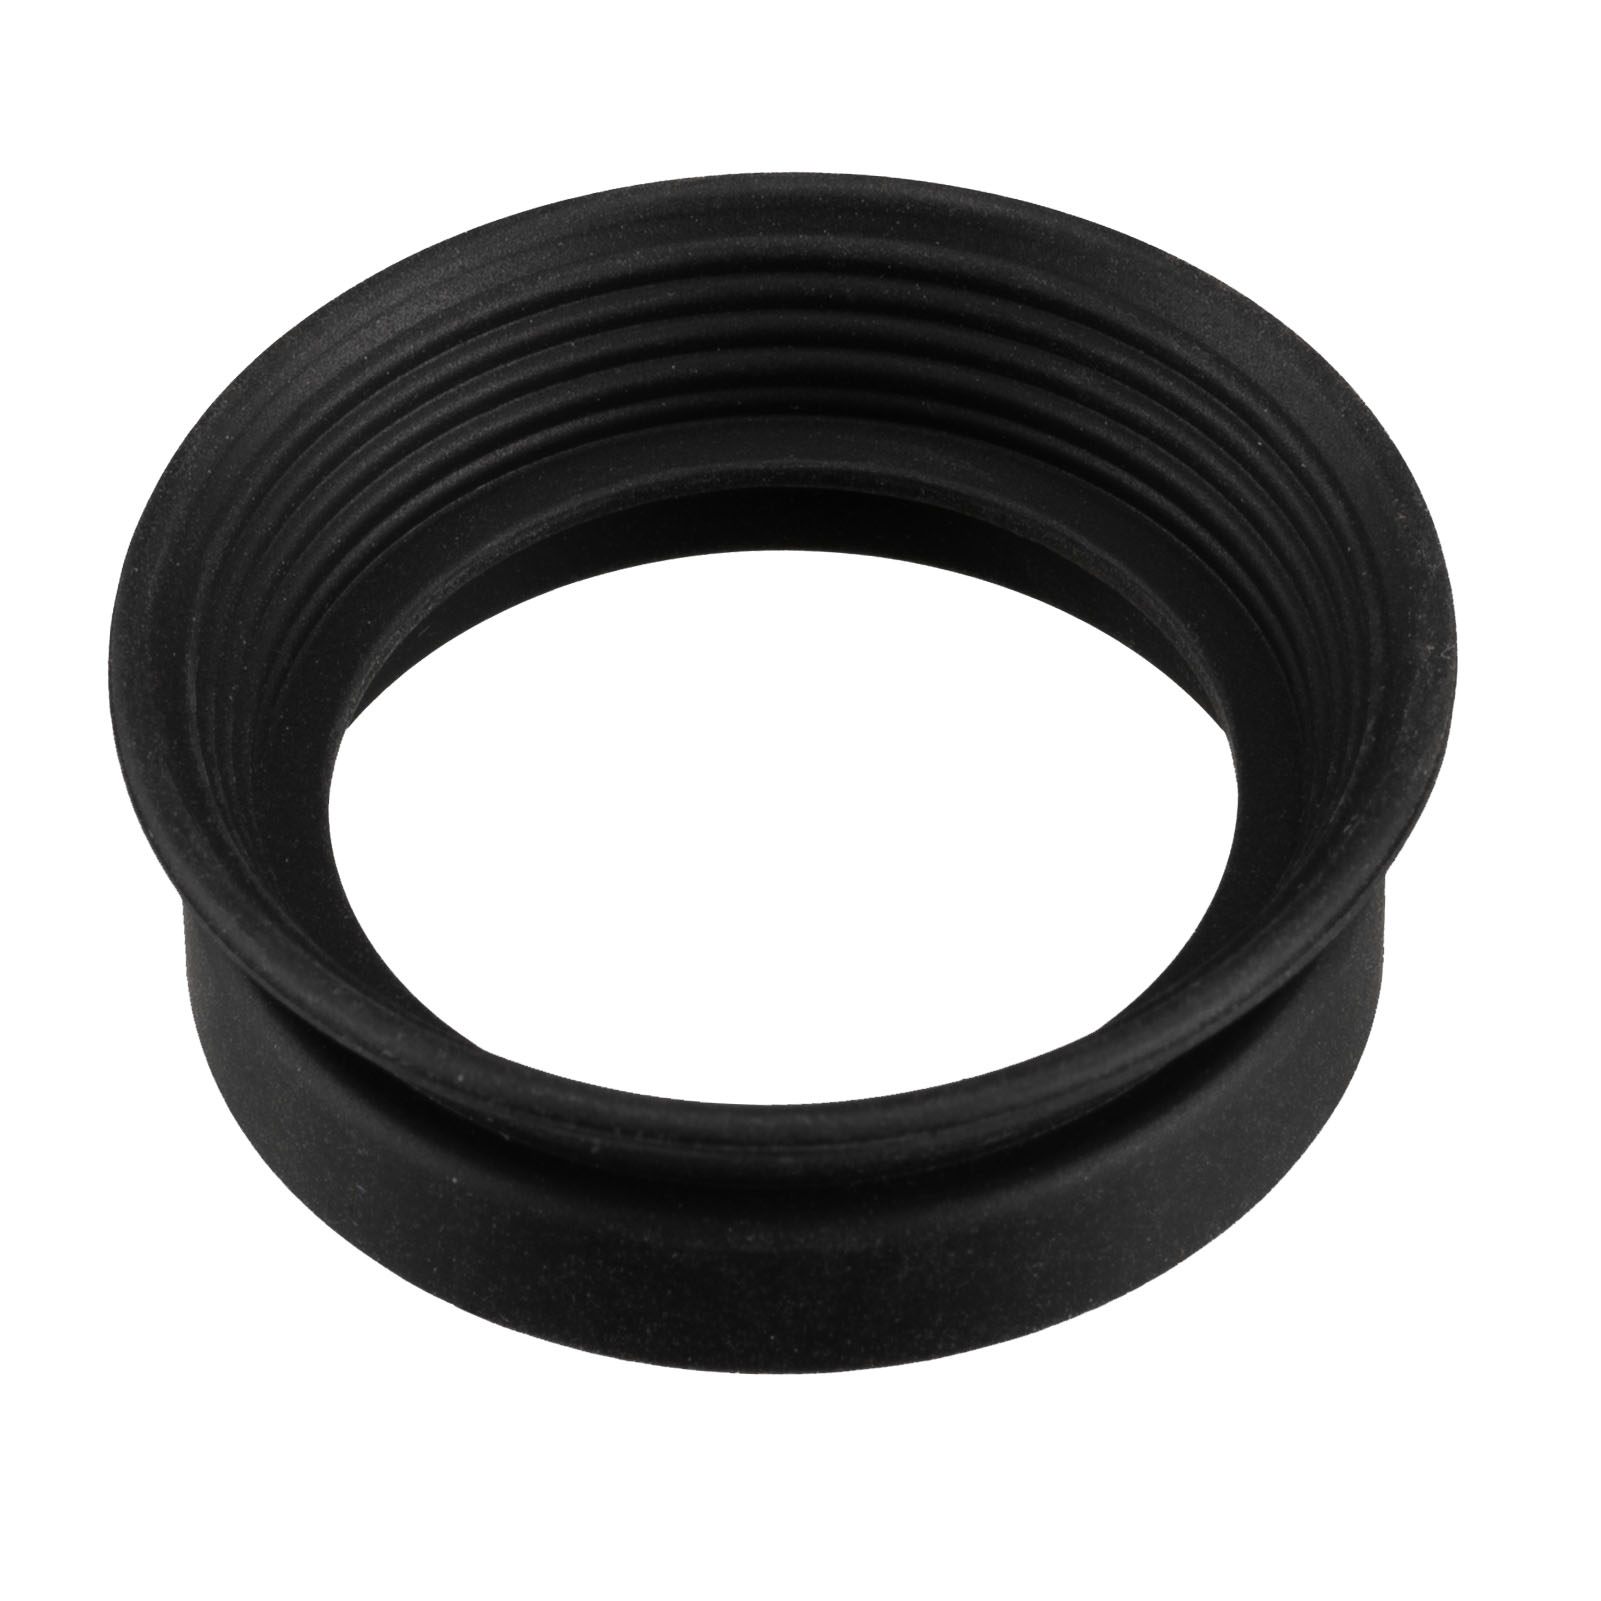 Silicone Eye Cup Diameter 32mm for ES Eyepieces